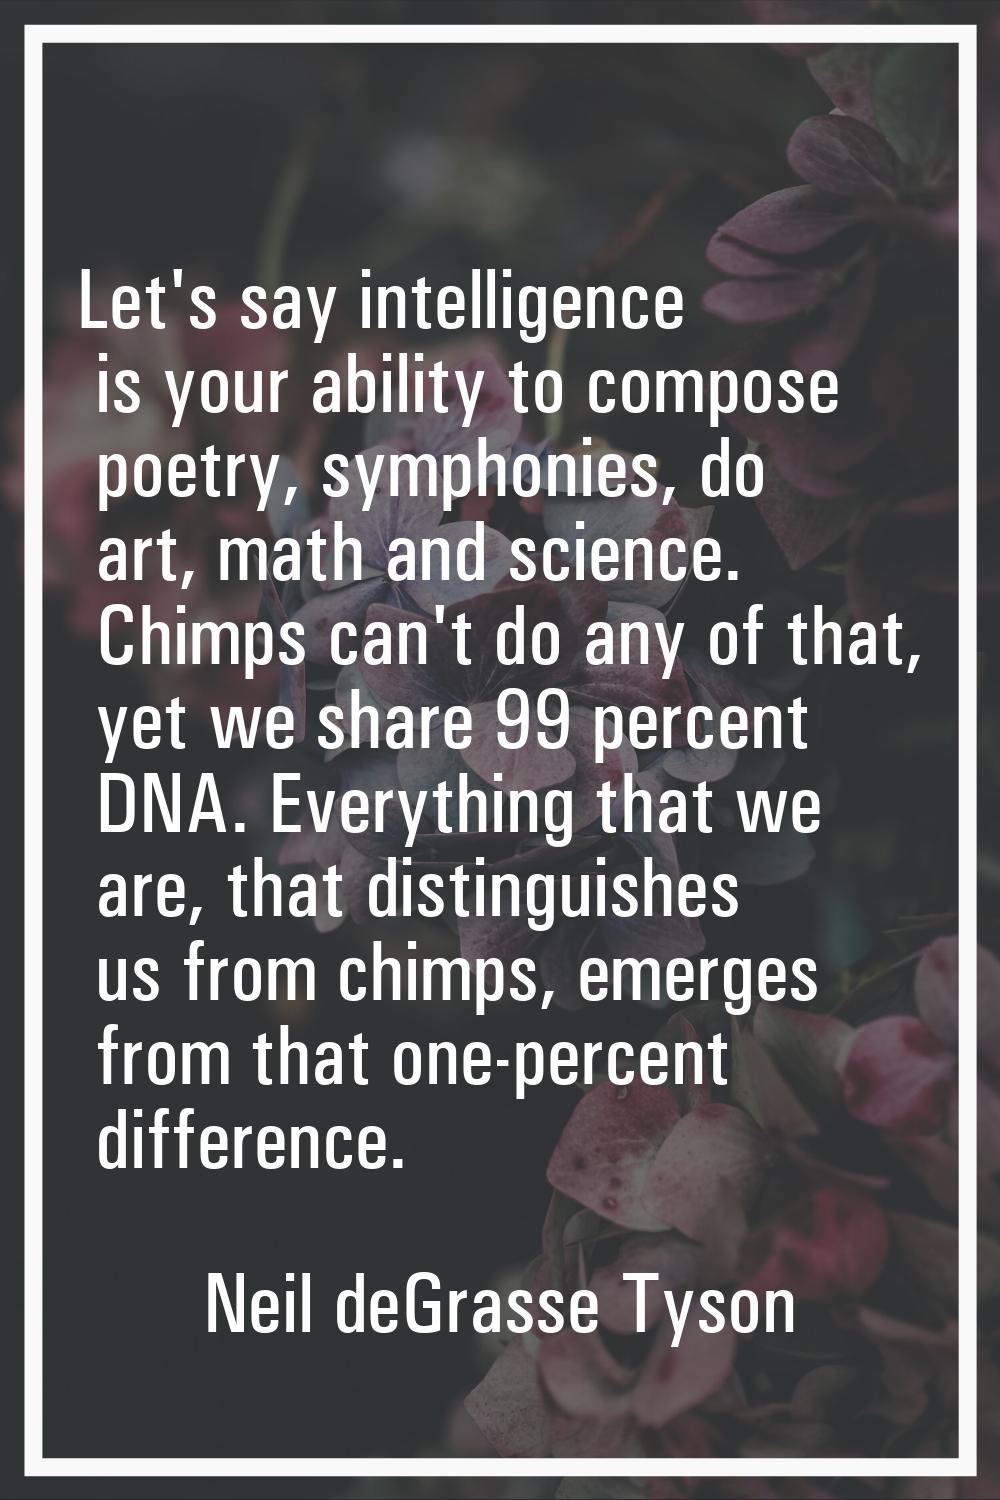 Let's say intelligence is your ability to compose poetry, symphonies, do art, math and science. Chi